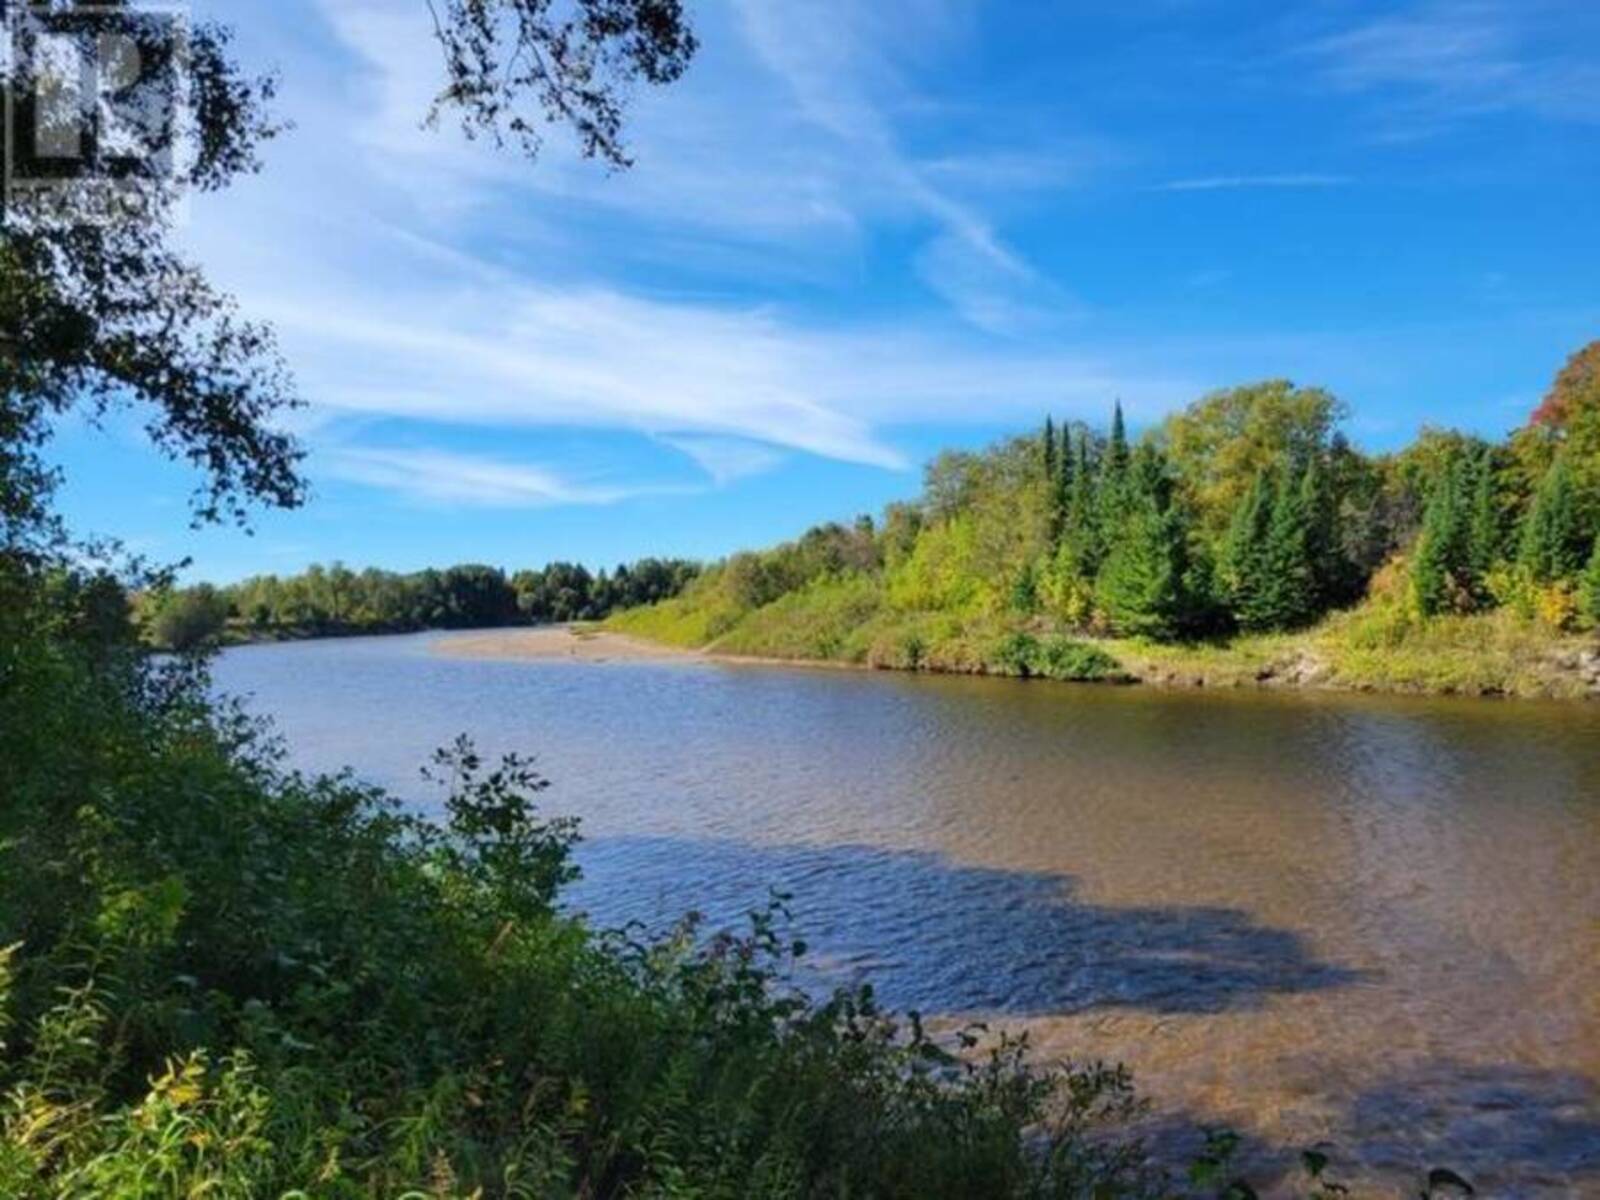 Lot #37 Byes Side RD, Goulais River, Ontario P0S 1E0